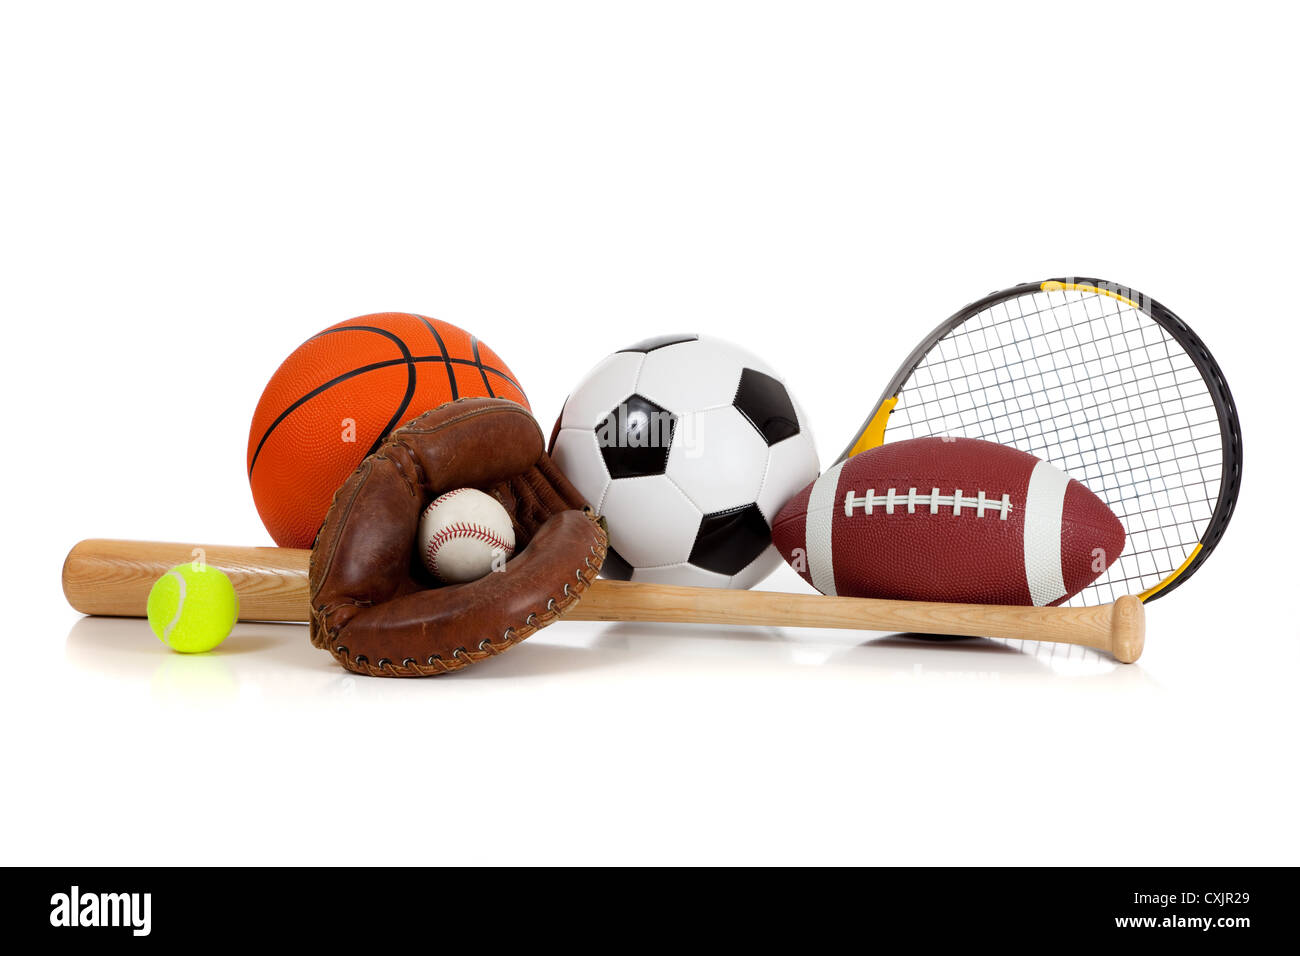 Various sports equipment on a white background Stock Photo